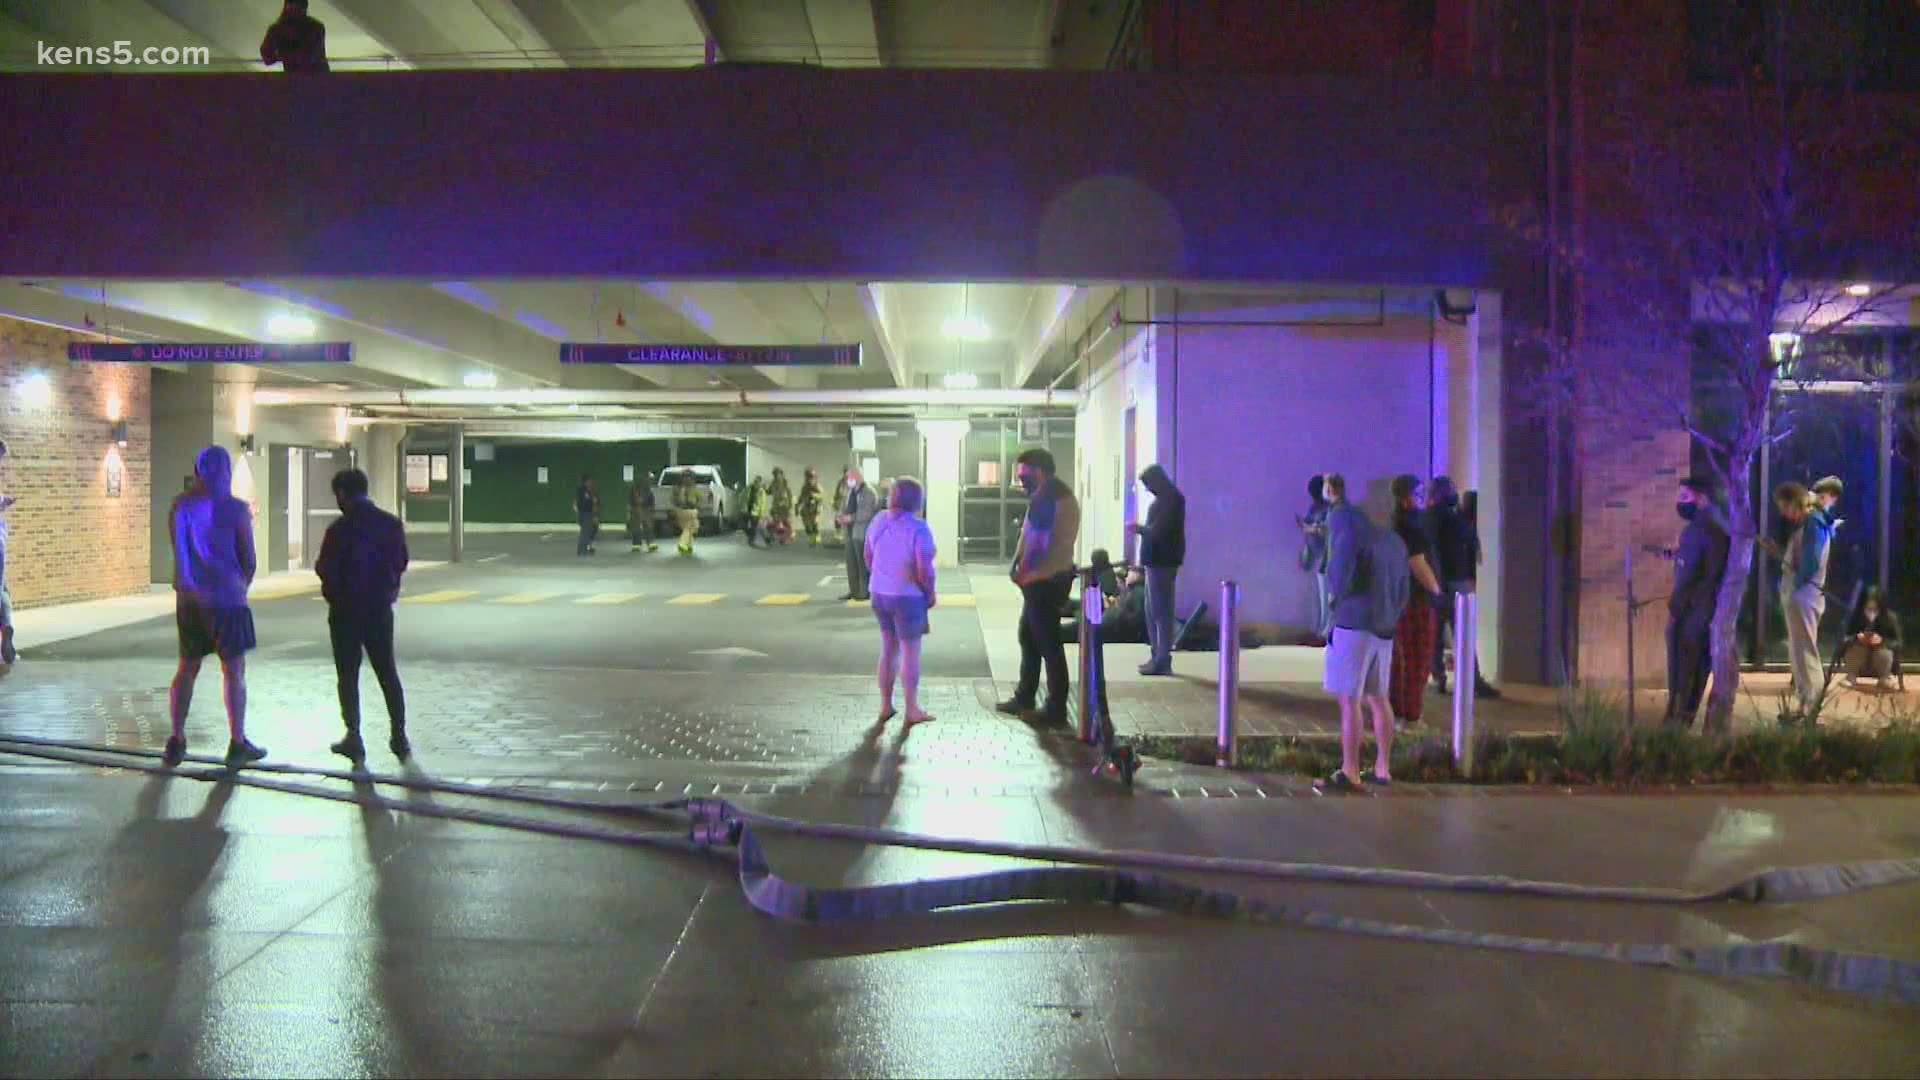 A fire forced more than 100 people to evacuate their apartment building downtown.